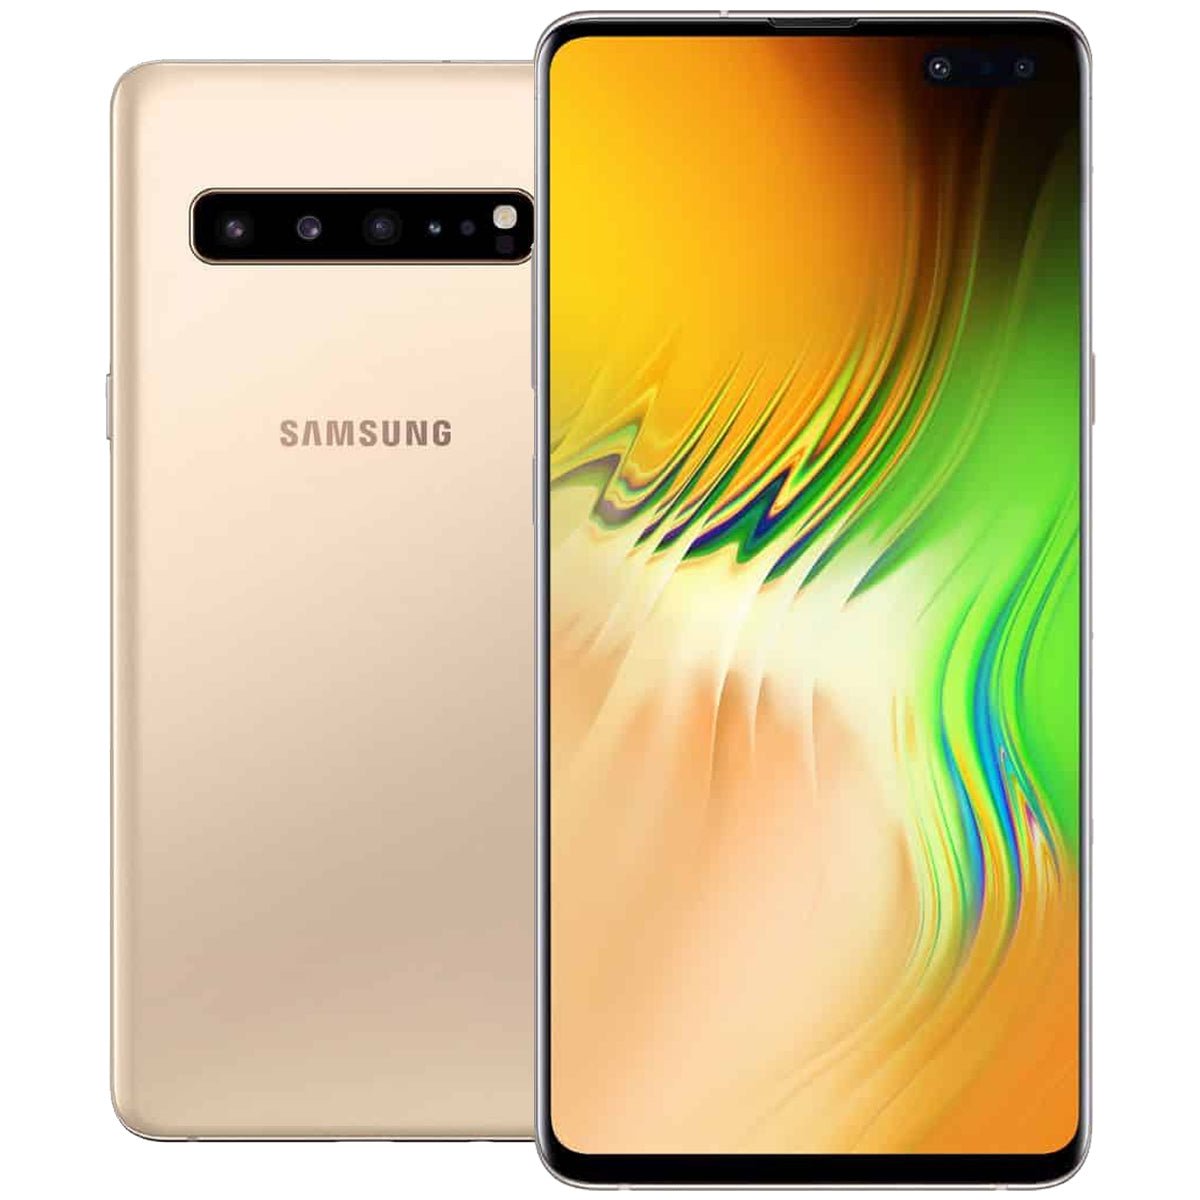 Samsung Galaxy S10 5G EXCELLENT Condition Unlocked Smartphone - RueZone Smartphons Royal Gold 256GB